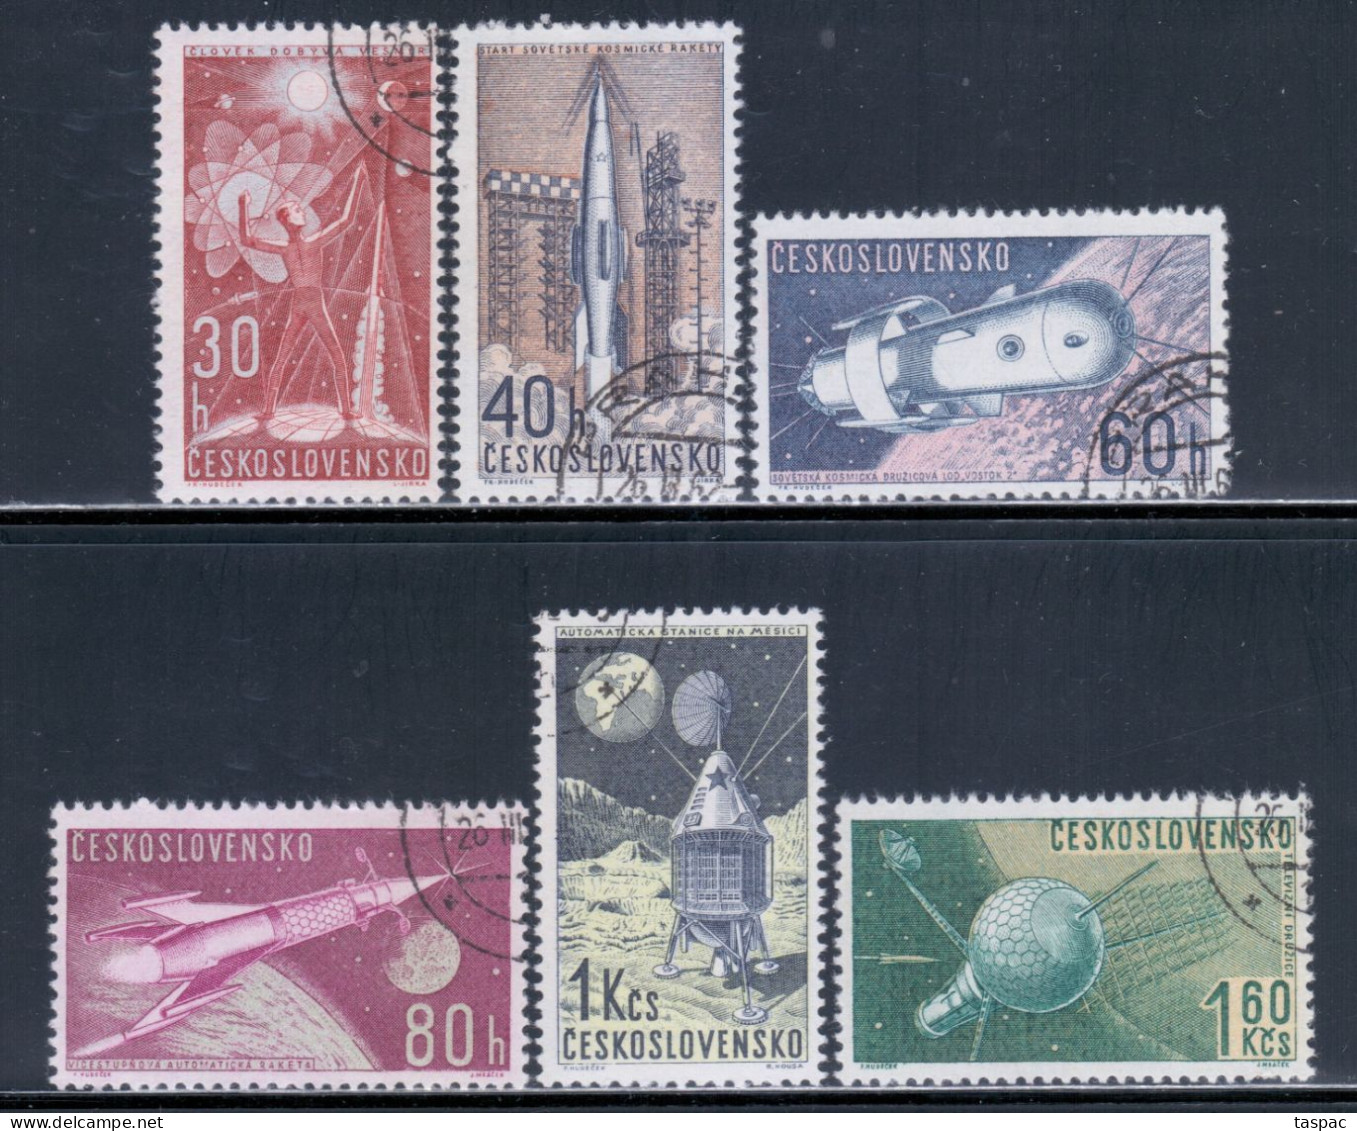 Czechoslovakia 1962 Mi# 1329-1334 Used - Space Research - Used Stamps